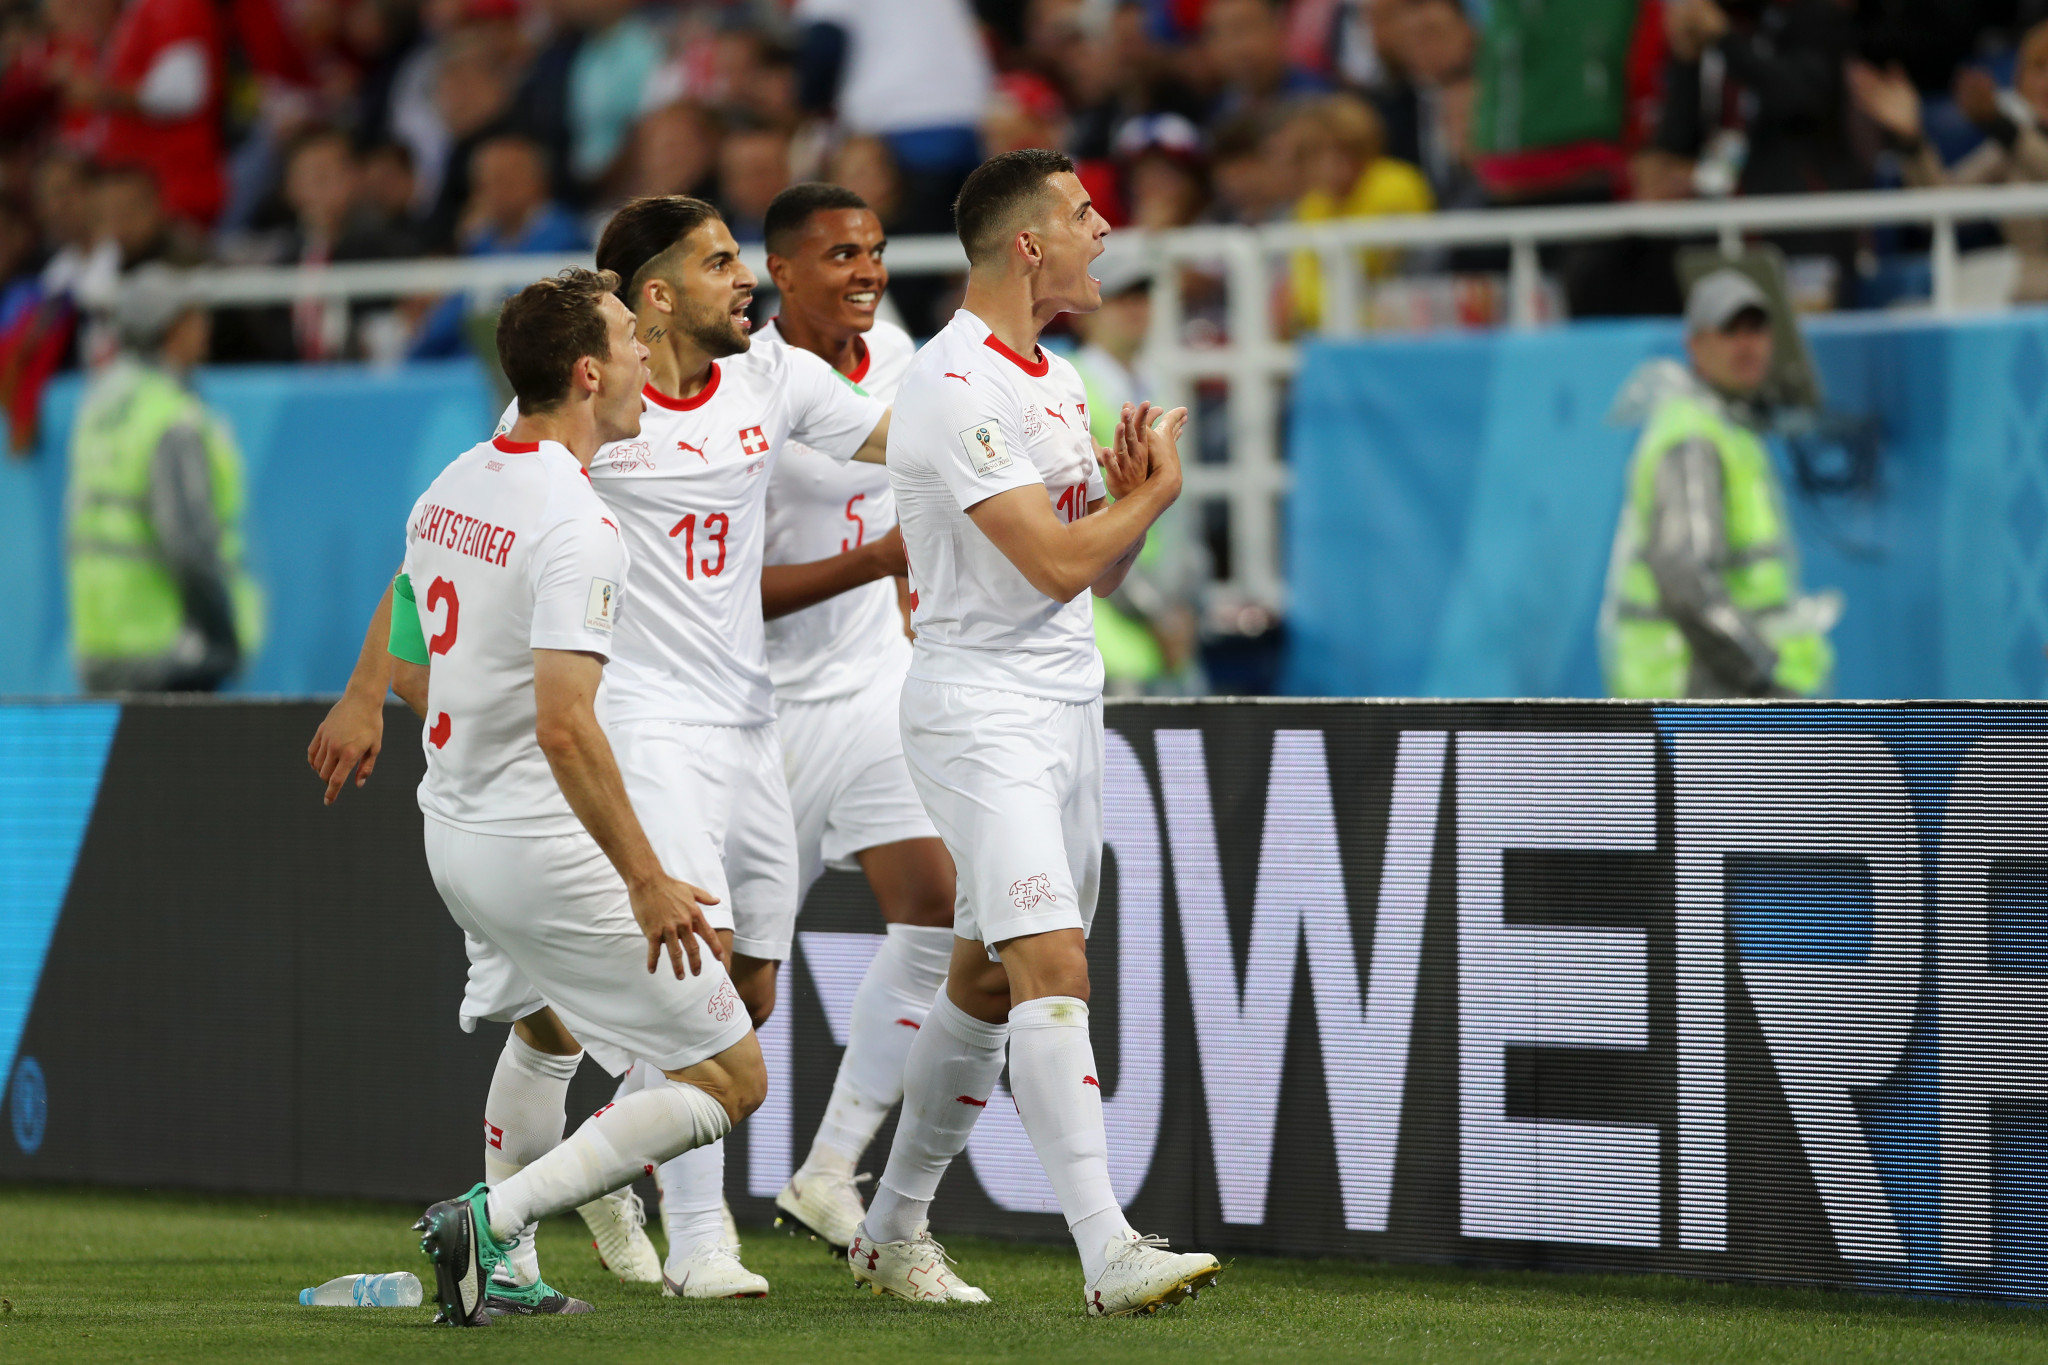 Swiss players were fined for making what was deemed an inflammatory gesture while playing against Serbia at the 2018 World Cup ©Getty Images